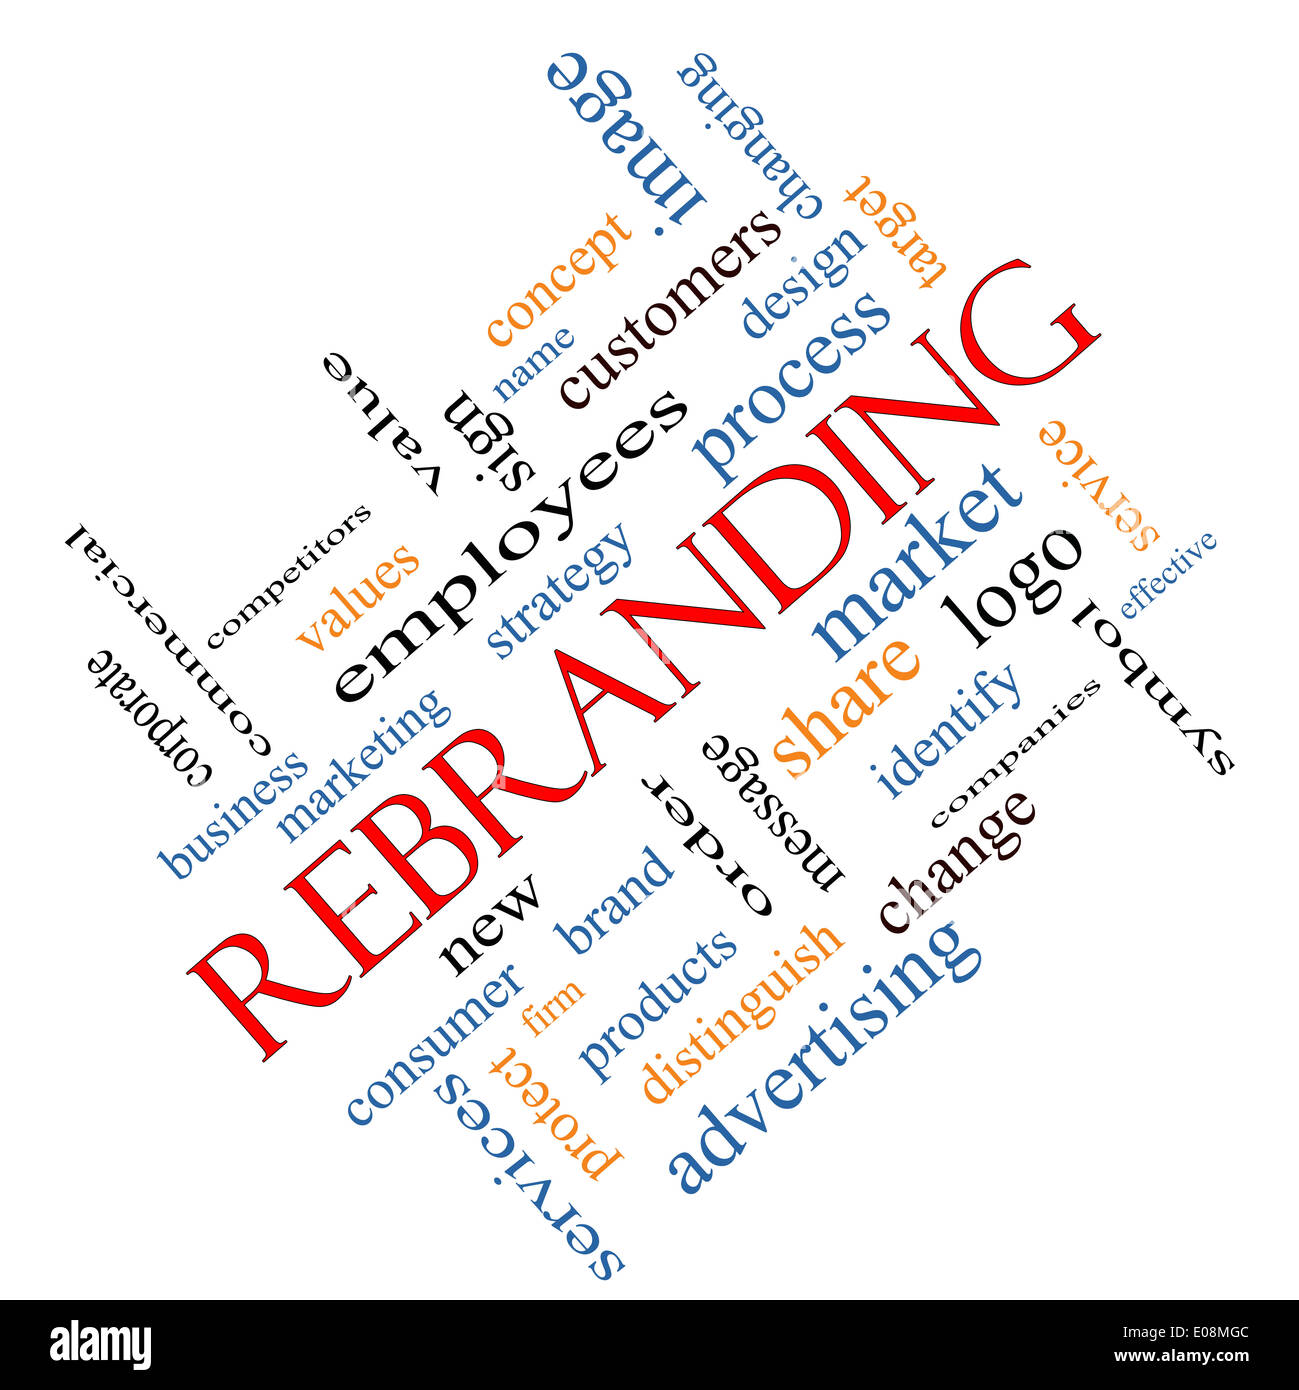 Rebranding Word Cloud Concept angled with great terms such as market, business, logo and more. Stock Photo